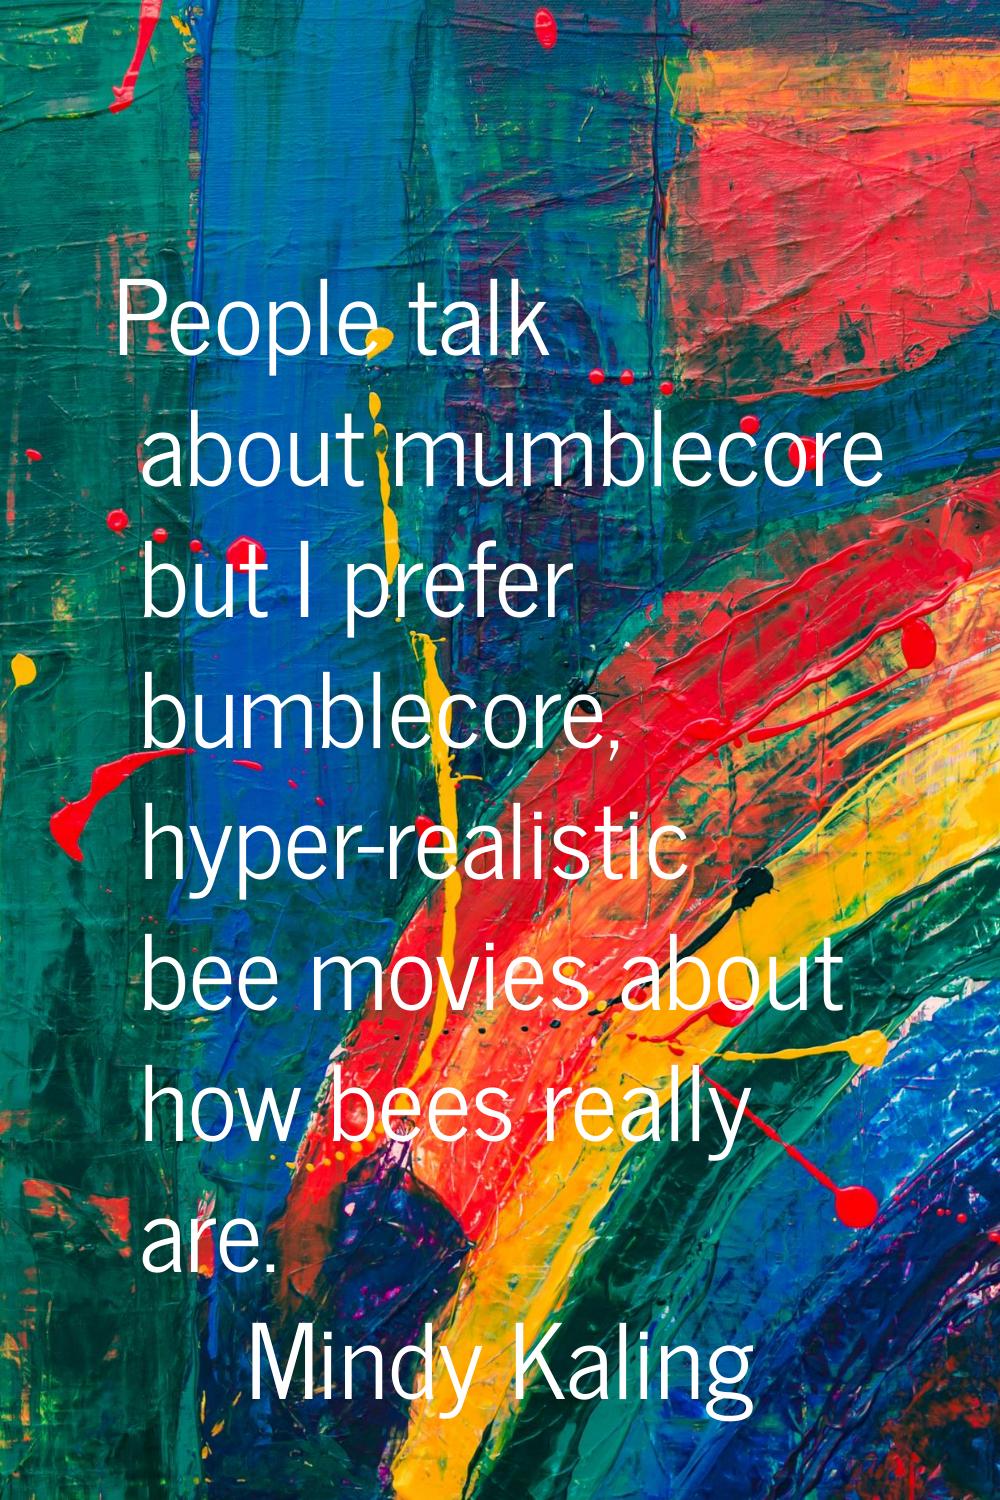 People talk about mumblecore but I prefer bumblecore, hyper-realistic bee movies about how bees rea